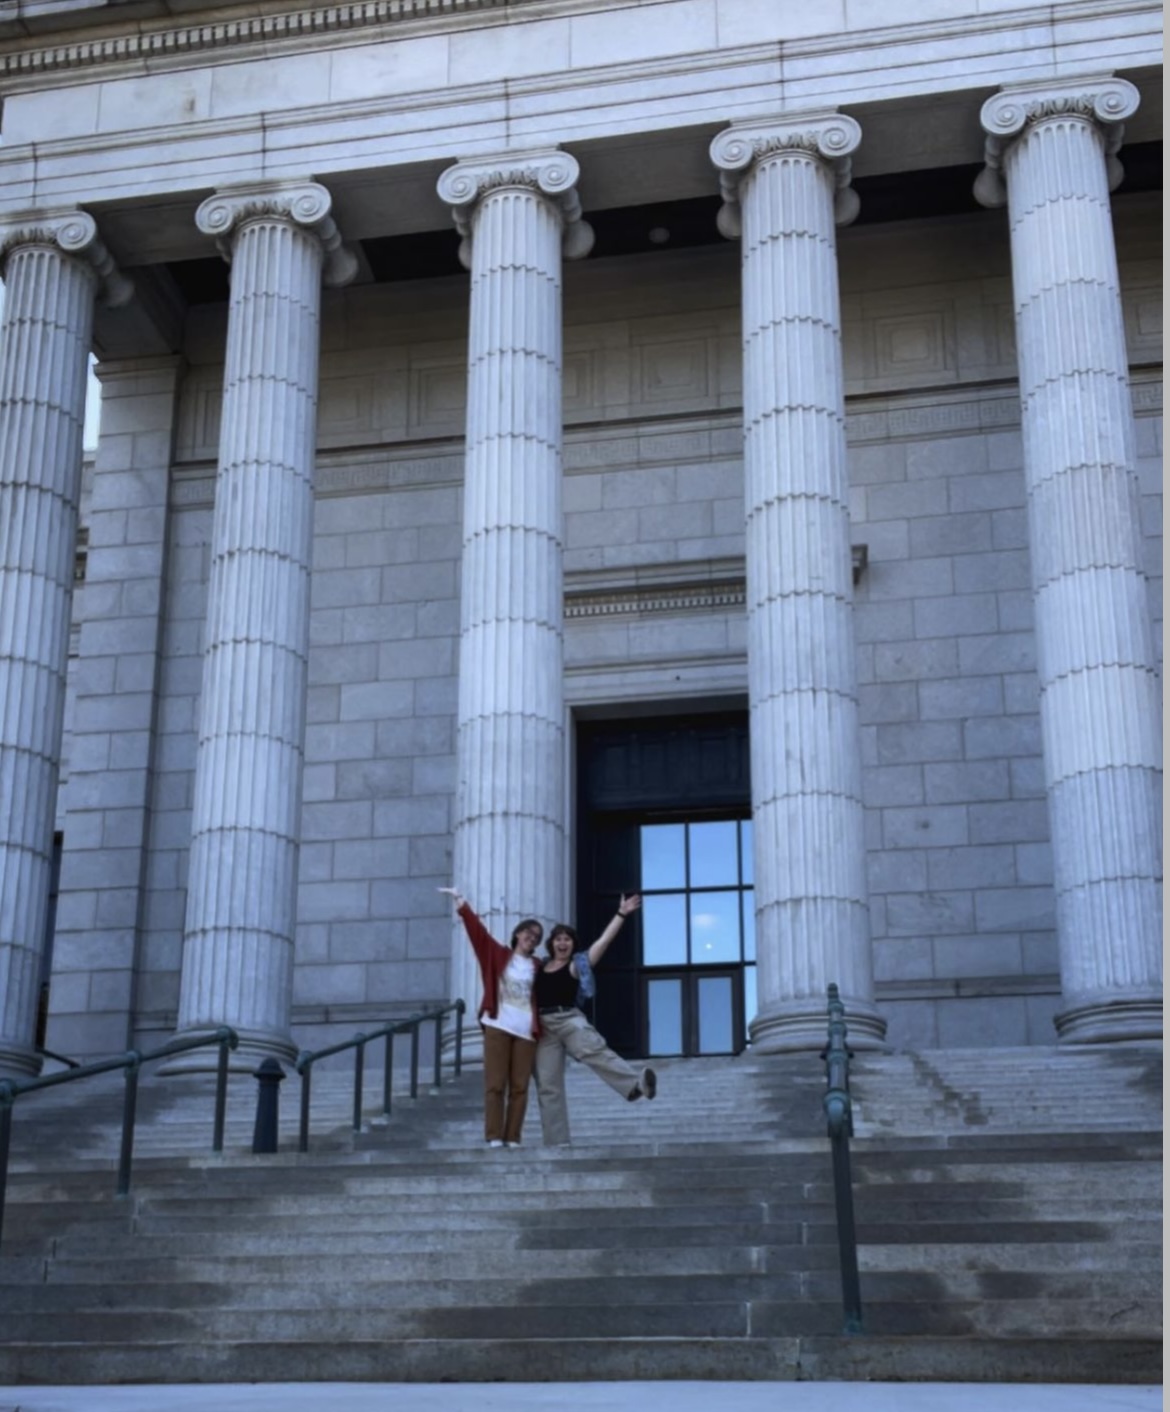 Honors students Erin O'Donnell and Claire Branding outside of the Minneapolis Institute of Art